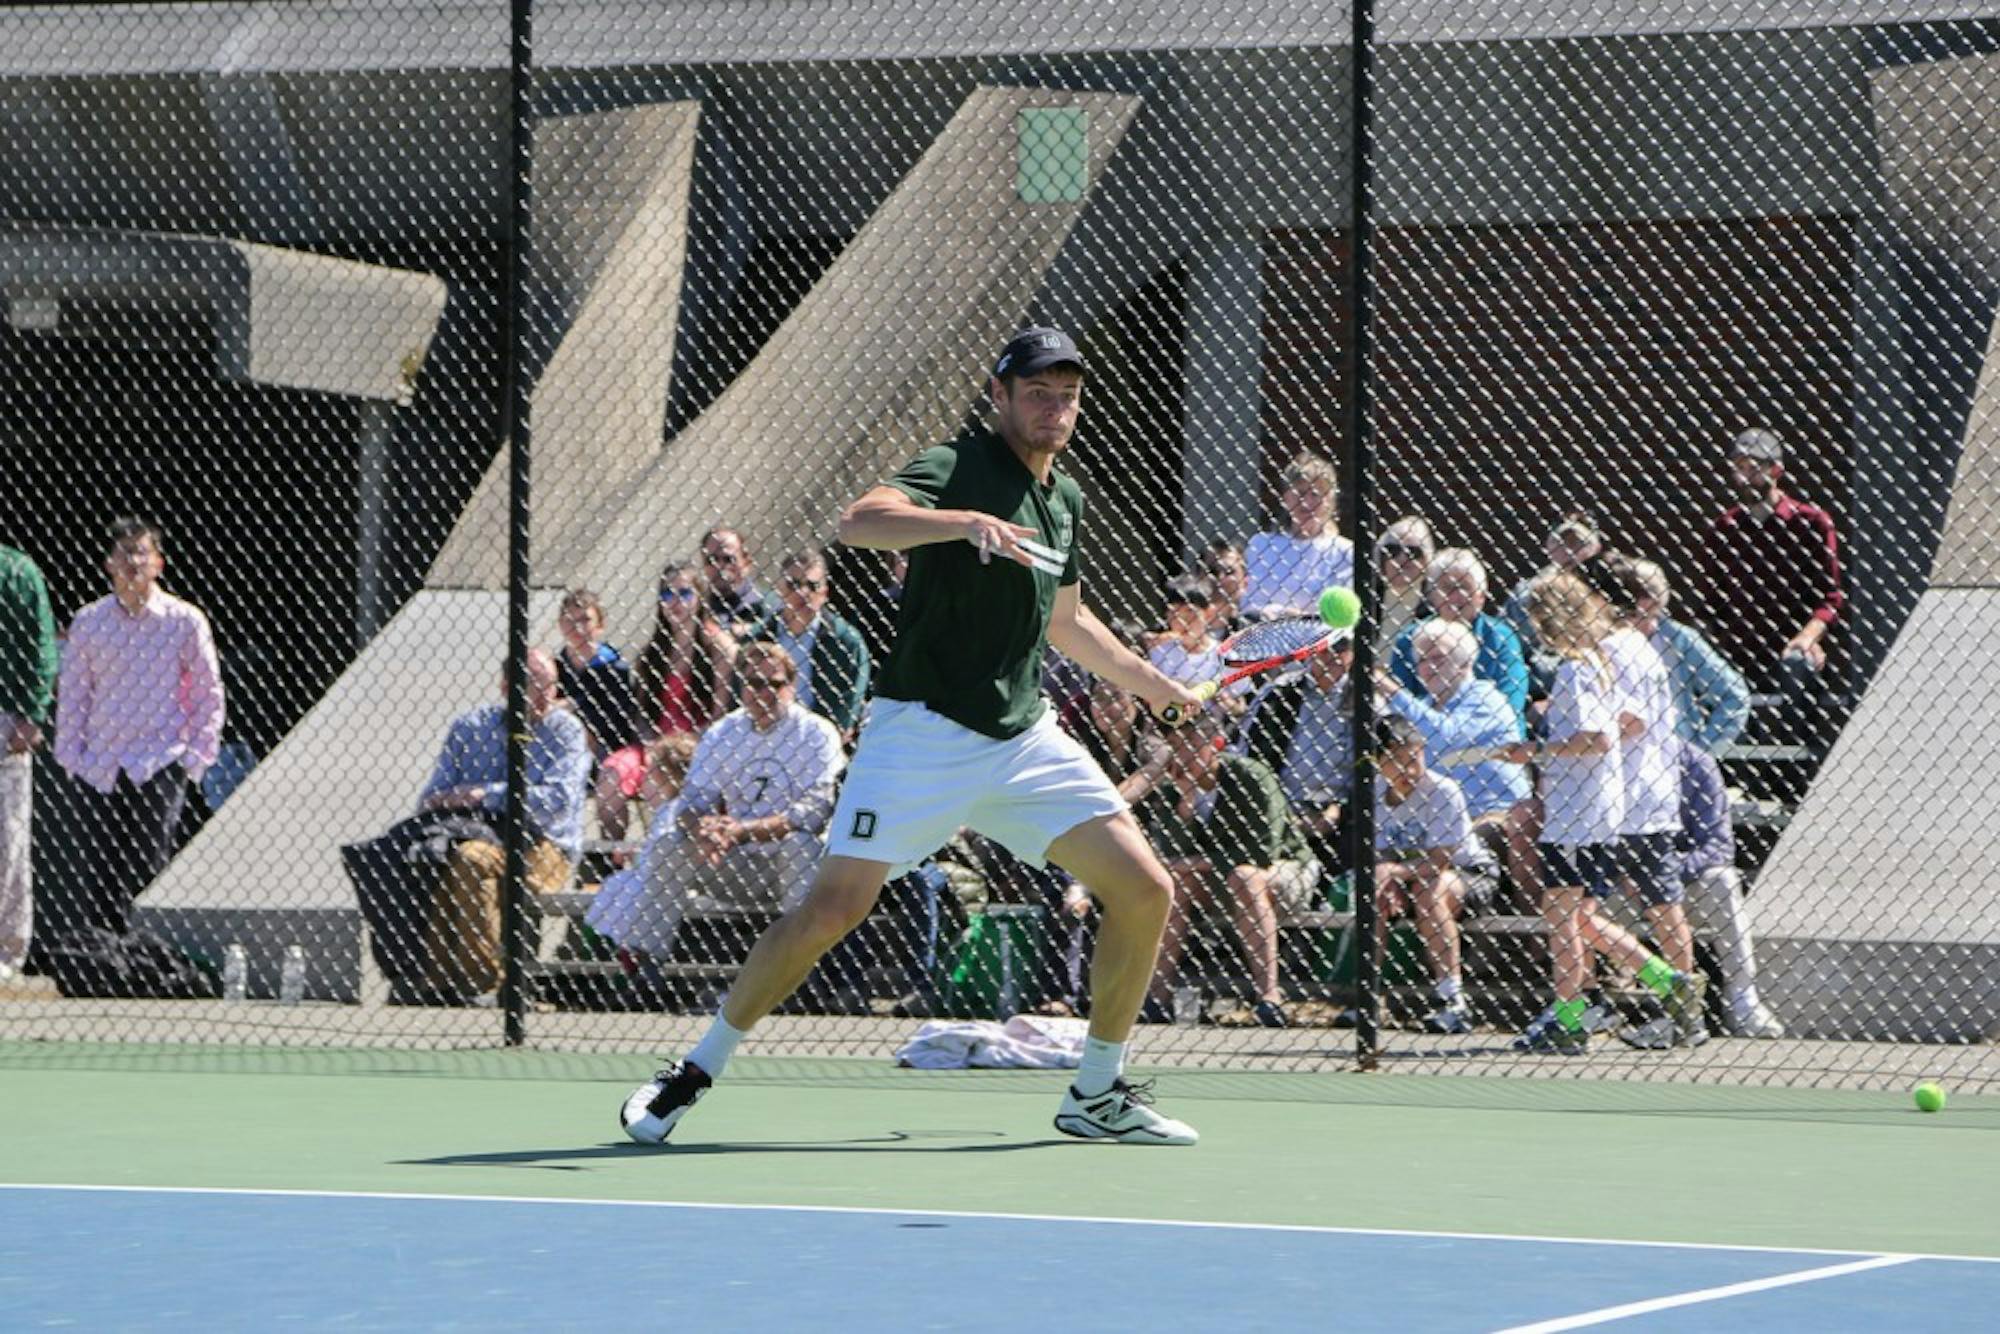 After being named Ivy League Player of the Year, Dovydas Sakinis ’16 qualified for the NCAA singles championship.